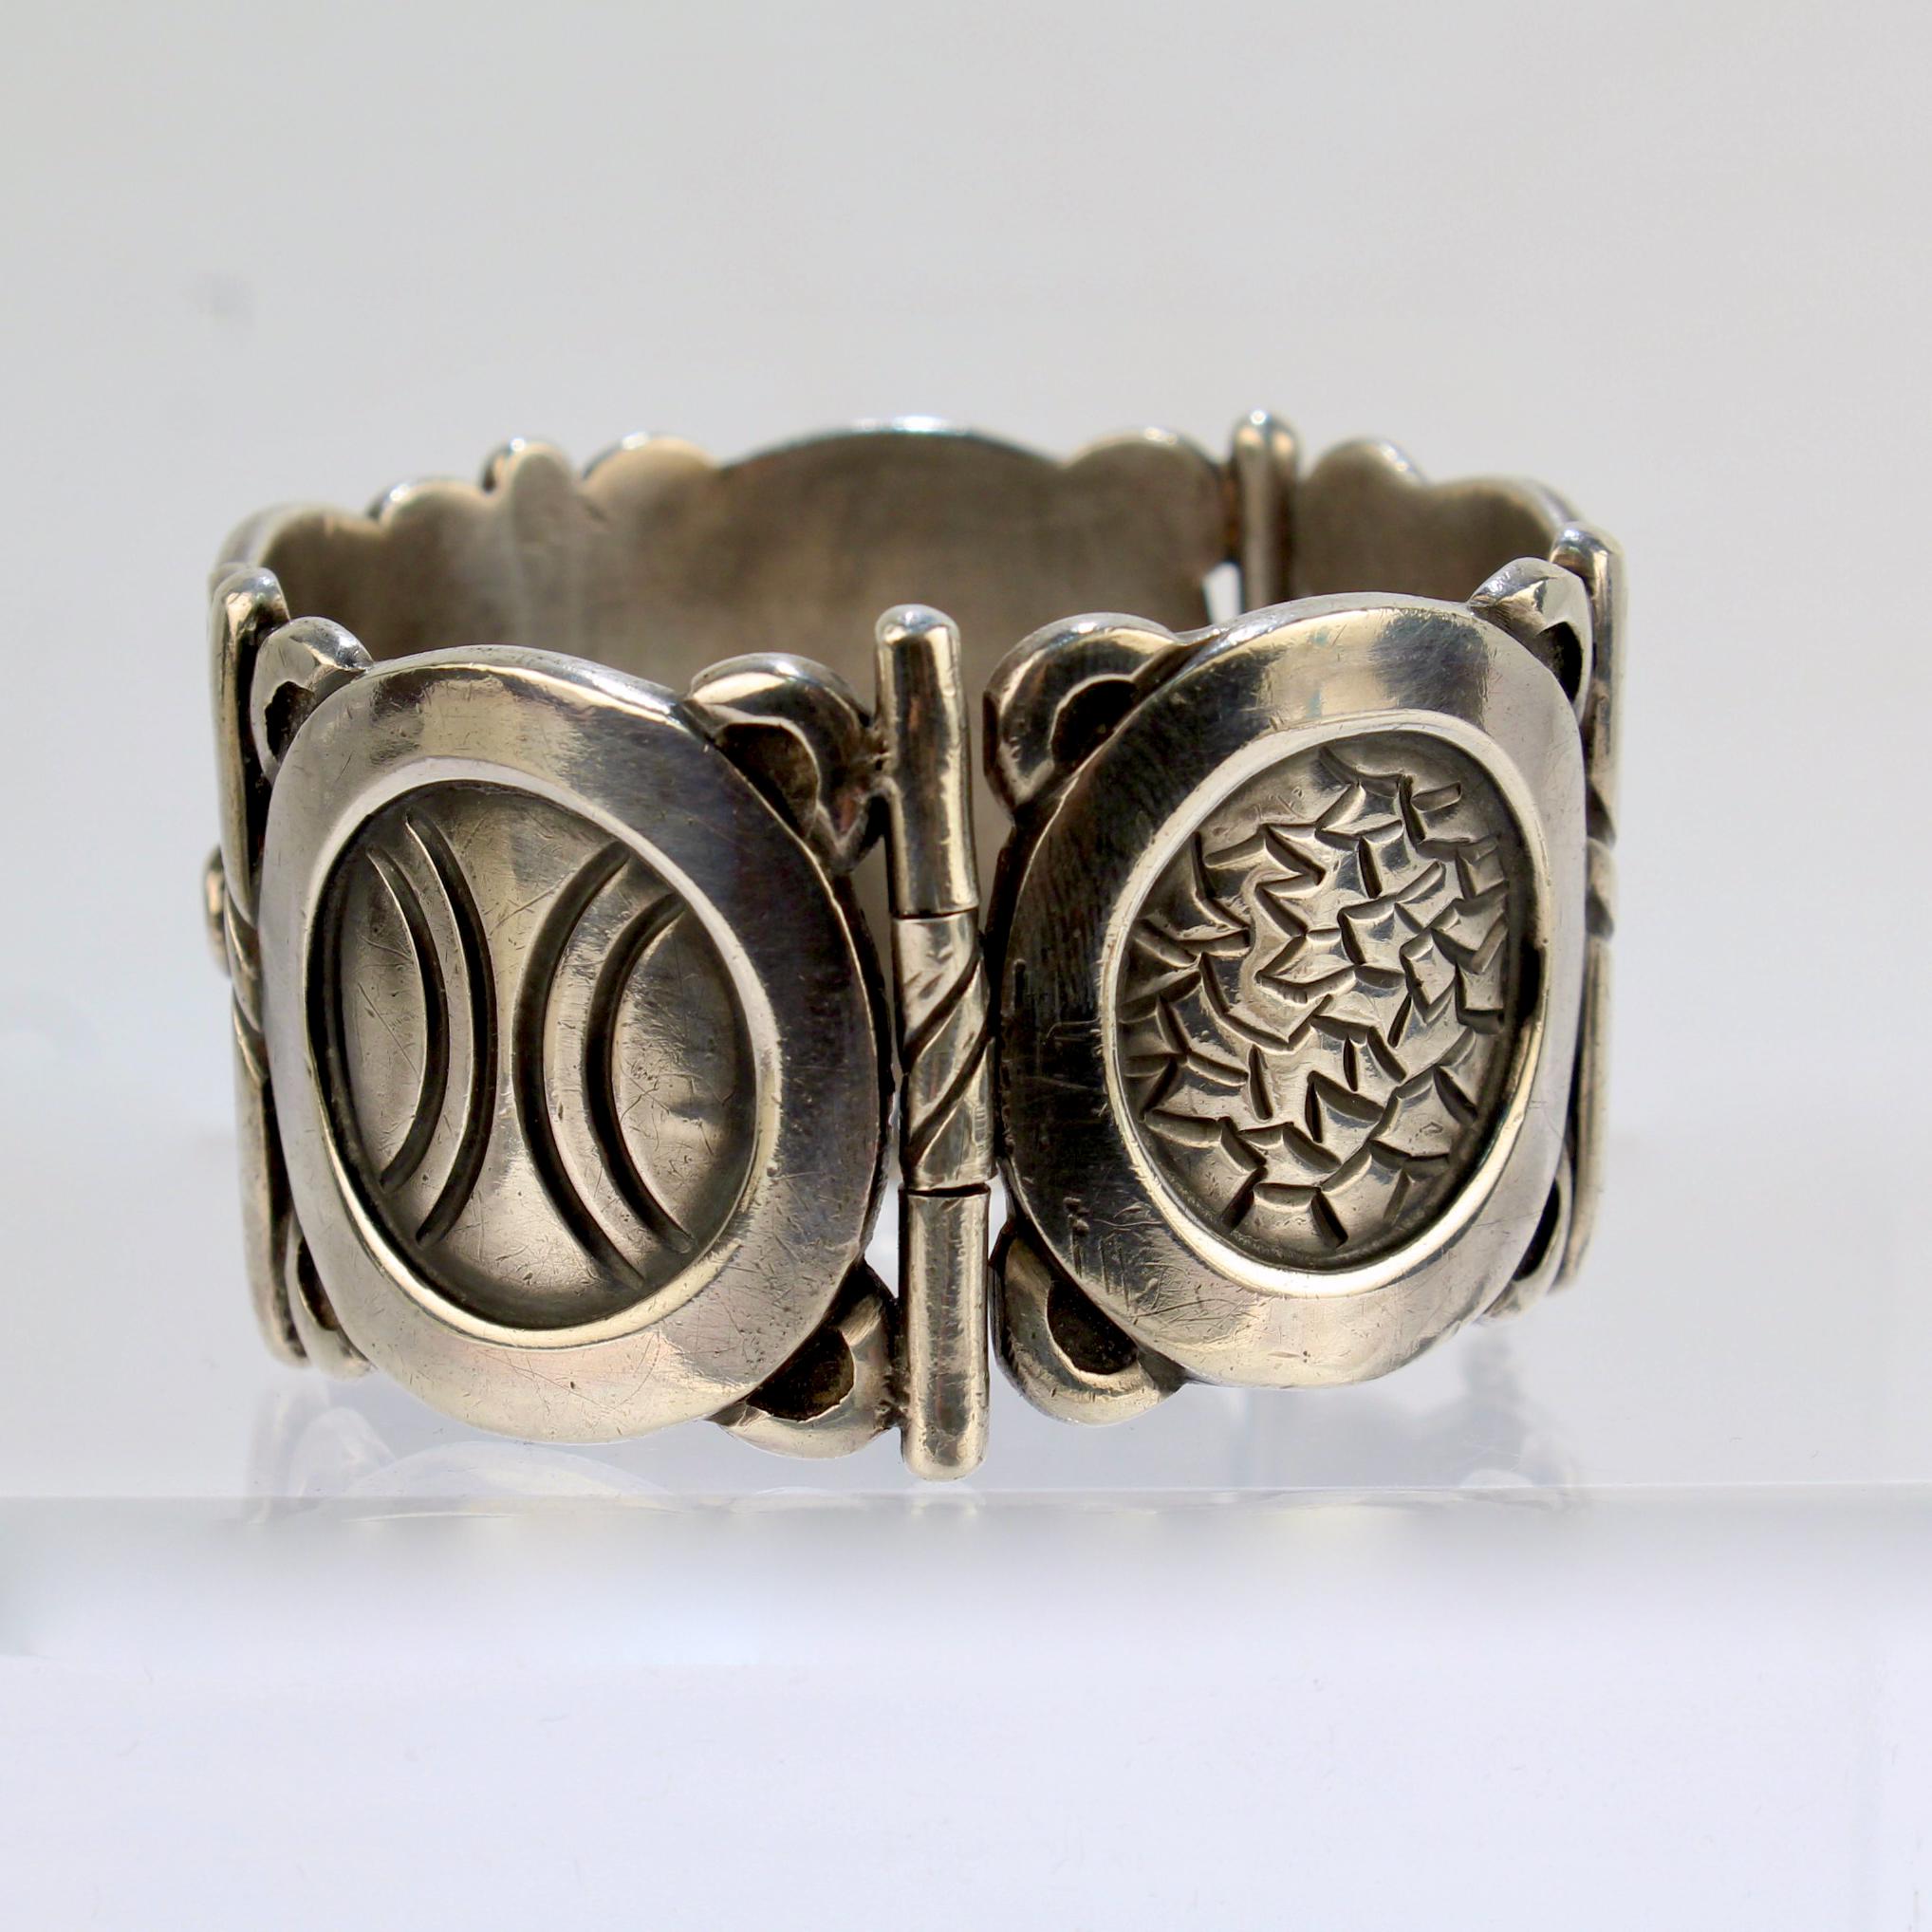 Women's or Men's Hector Aguilar Vintage Mexican Sterling Silver Cuff Bangle Bracelet